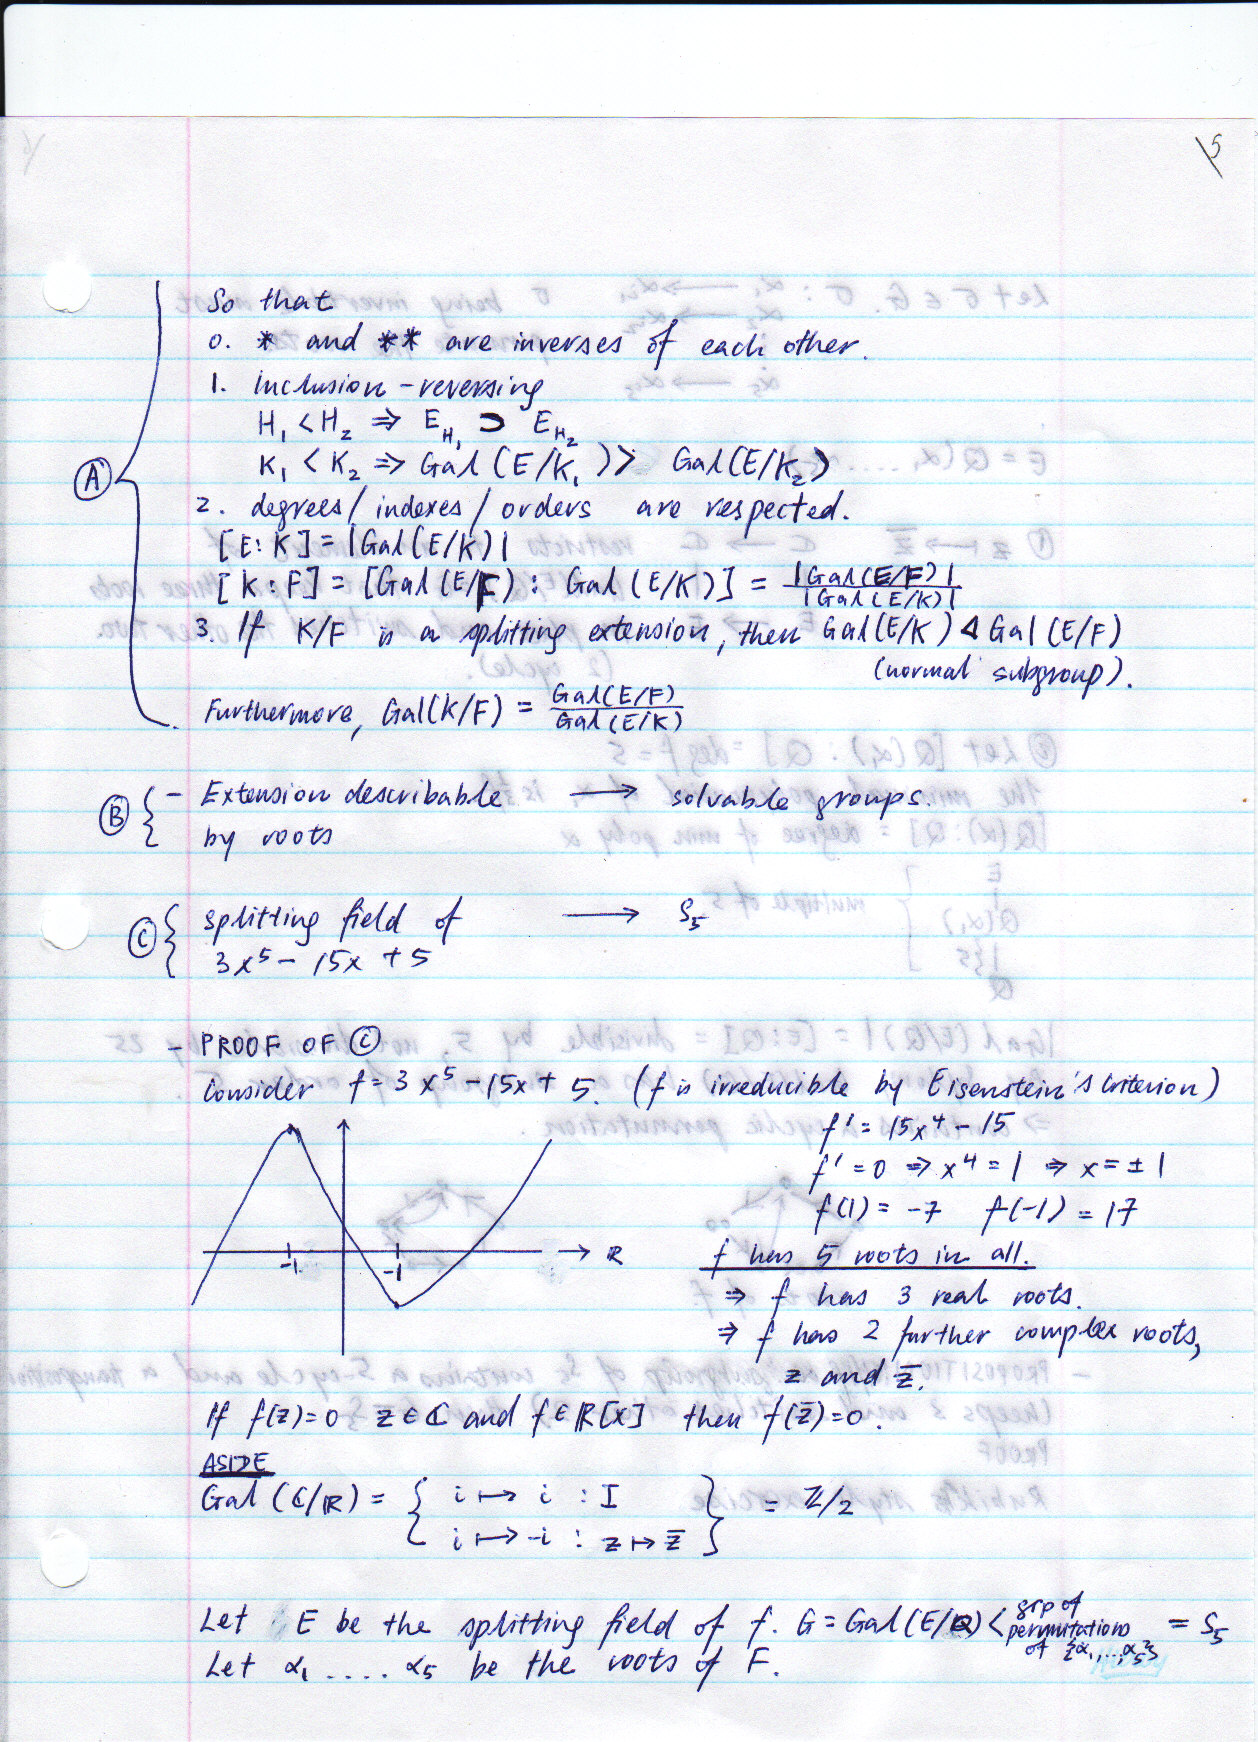 07-401 lecture 12 page 5.jpg